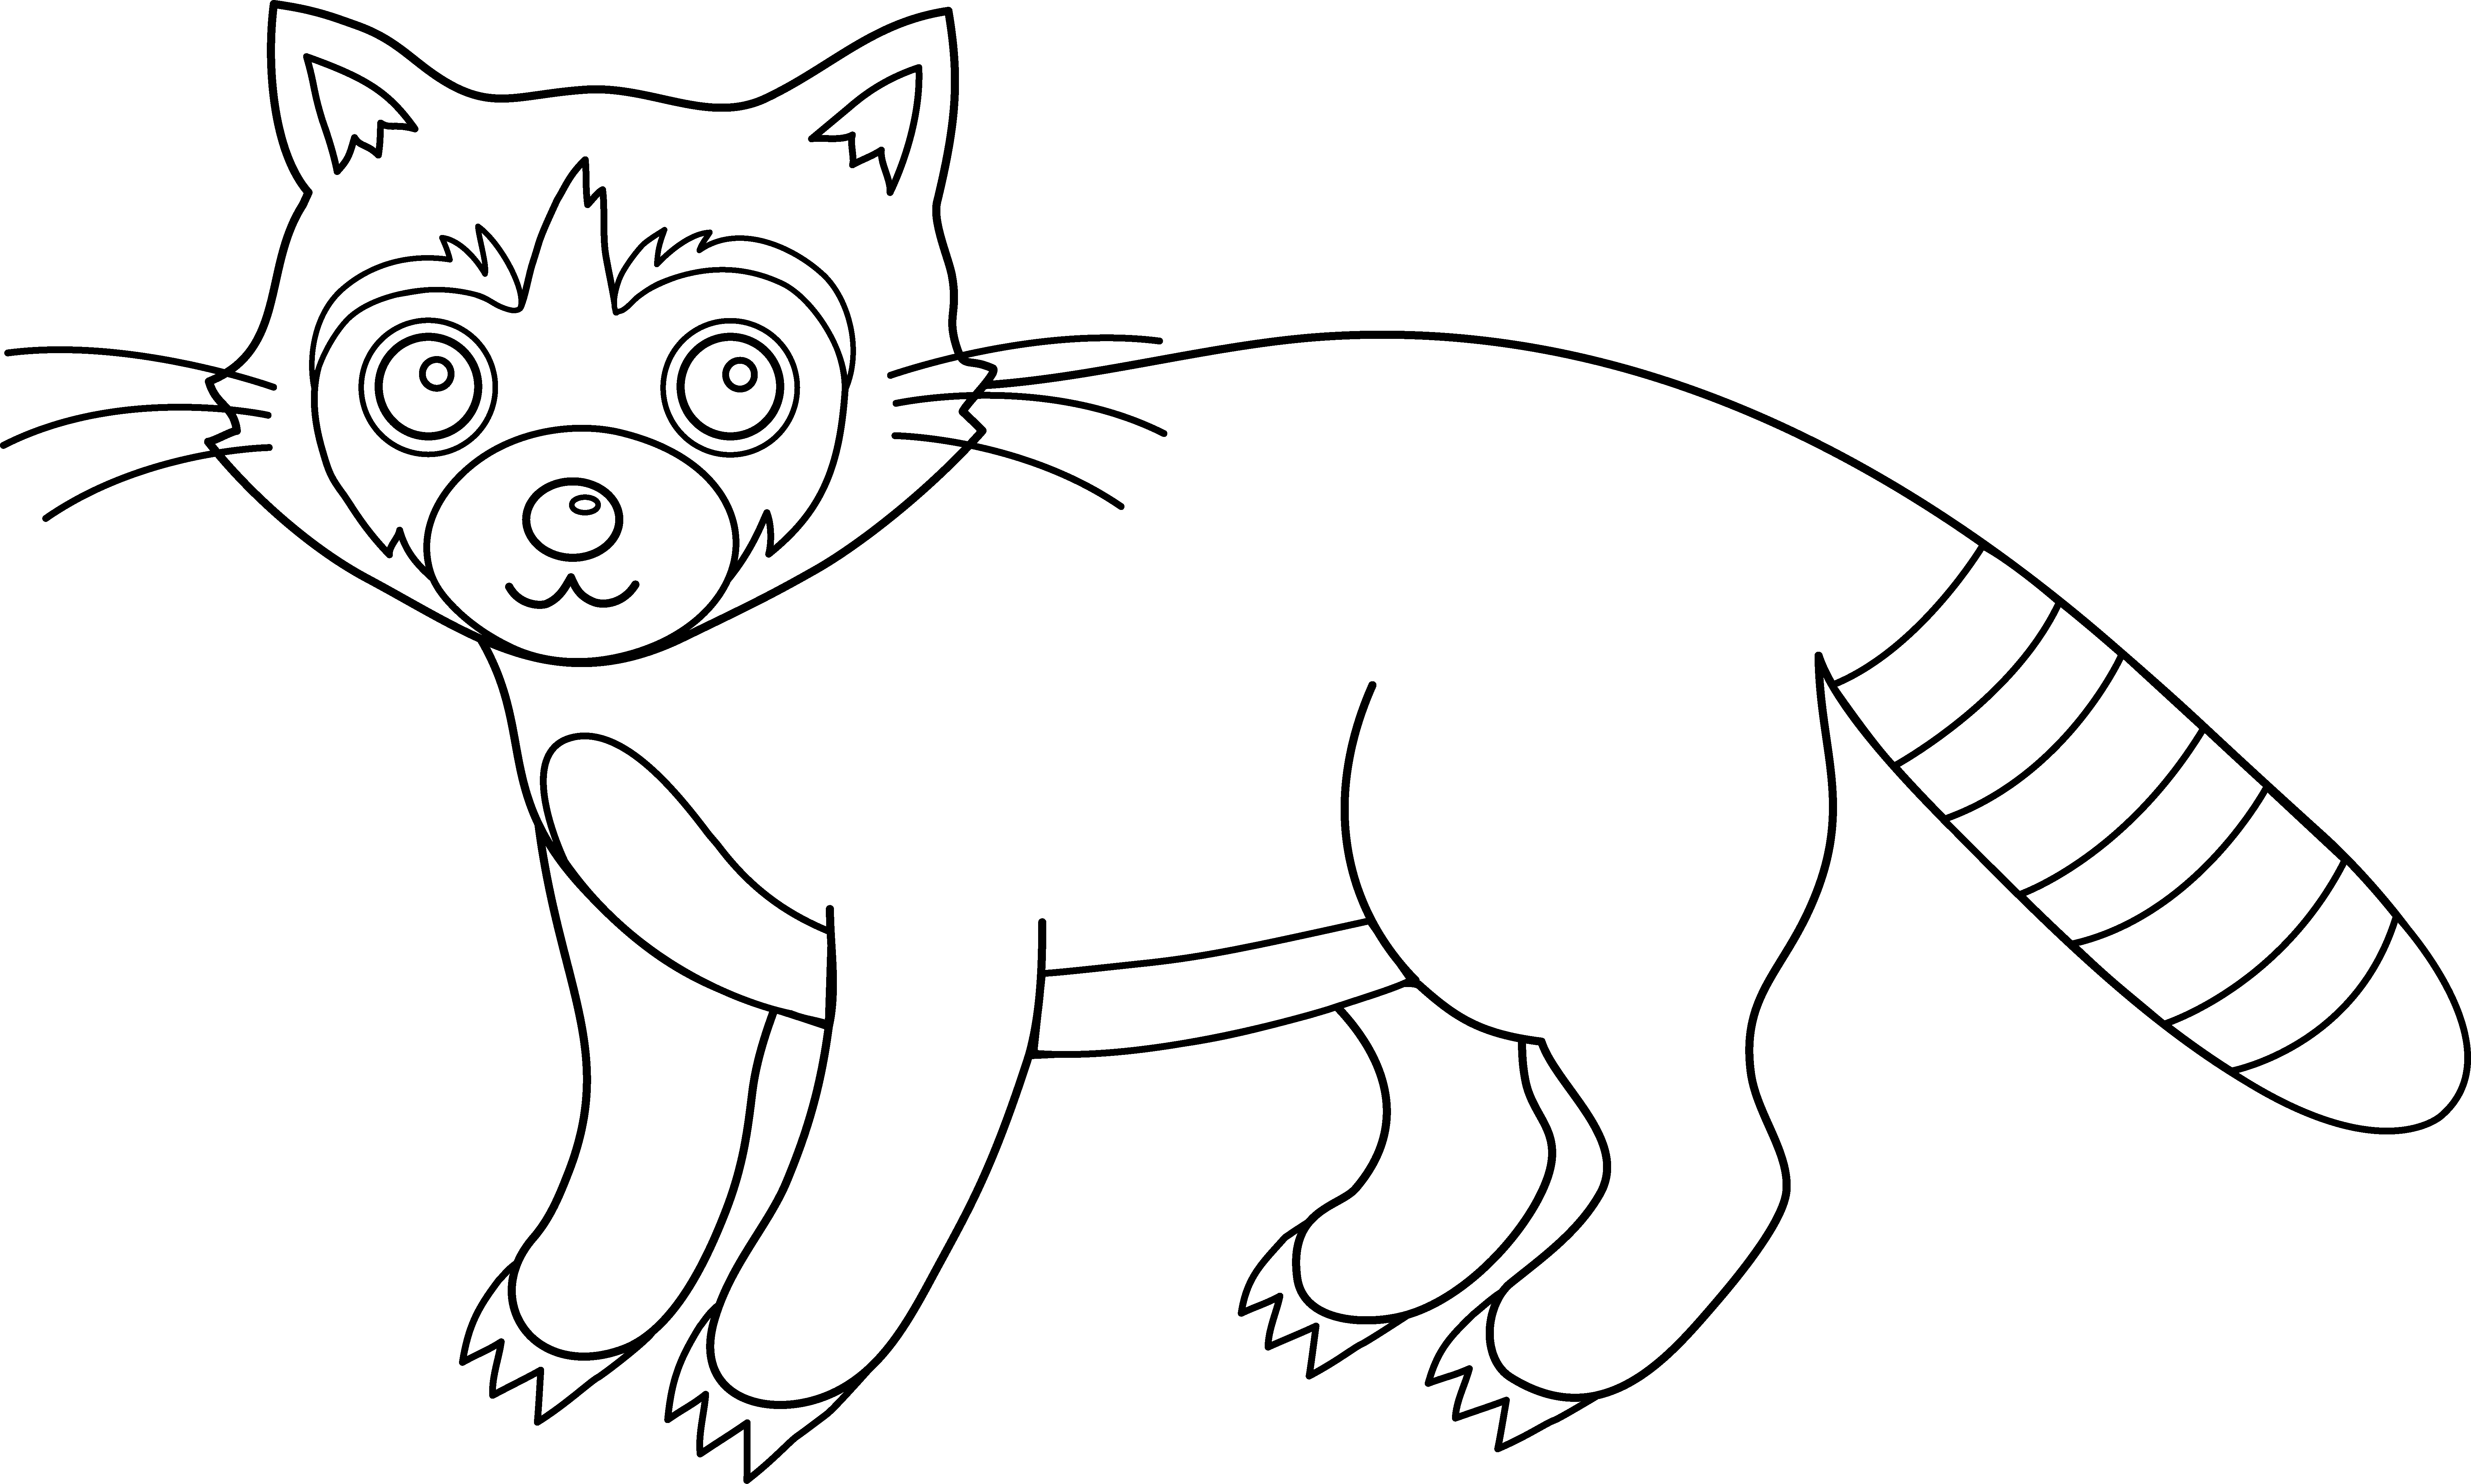 Colorable Raccoon - Free Clip Art